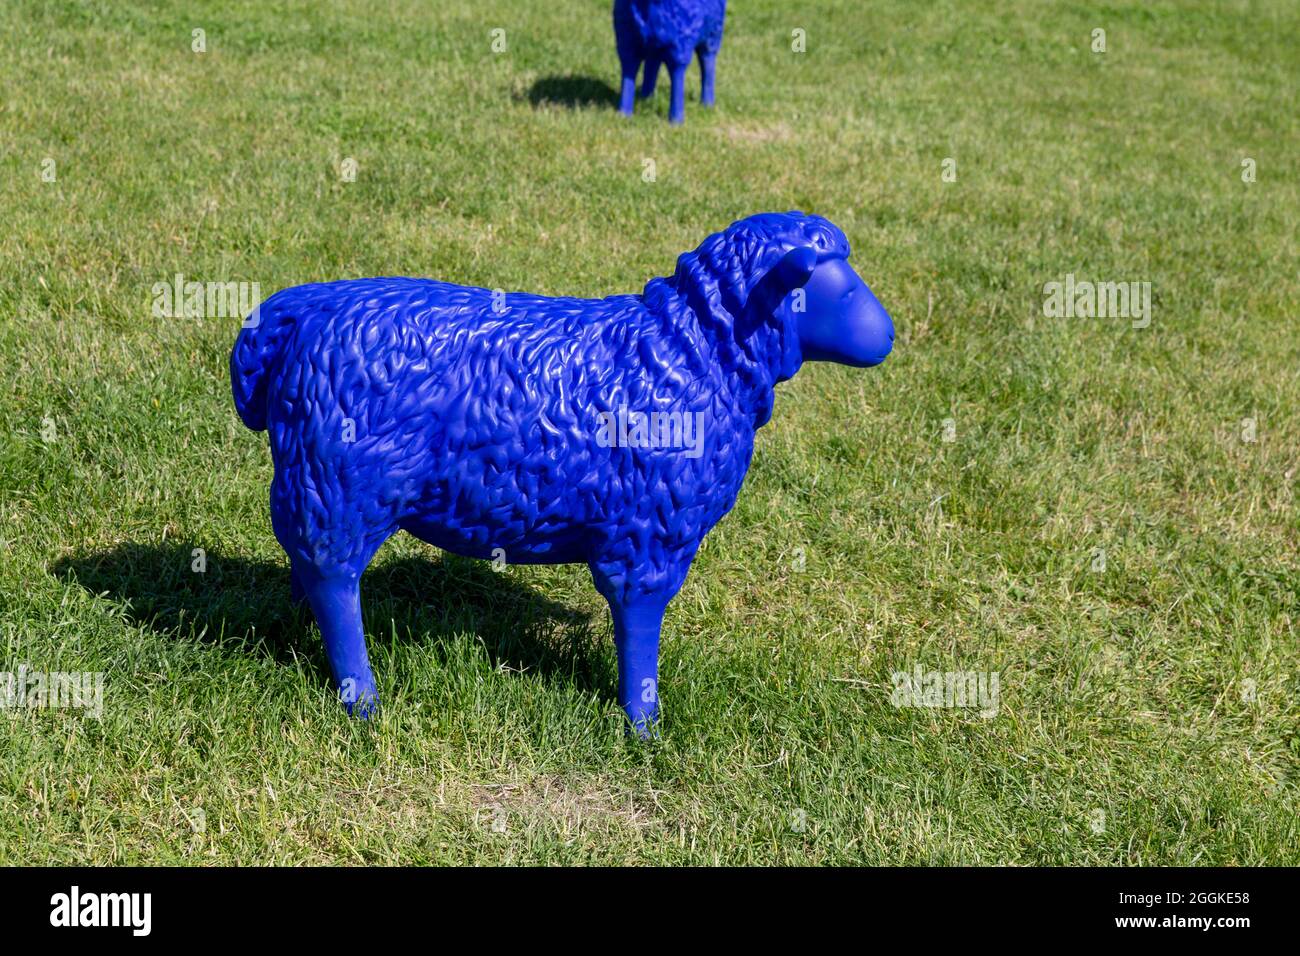 Blue Sheep, Inspiration Agriculture, Inspiration Nature, State Garden Show, Ingolstadt 2020, New Duration 2021, Ingolstadt, Bavaria, Germany, Europe Stock Photo